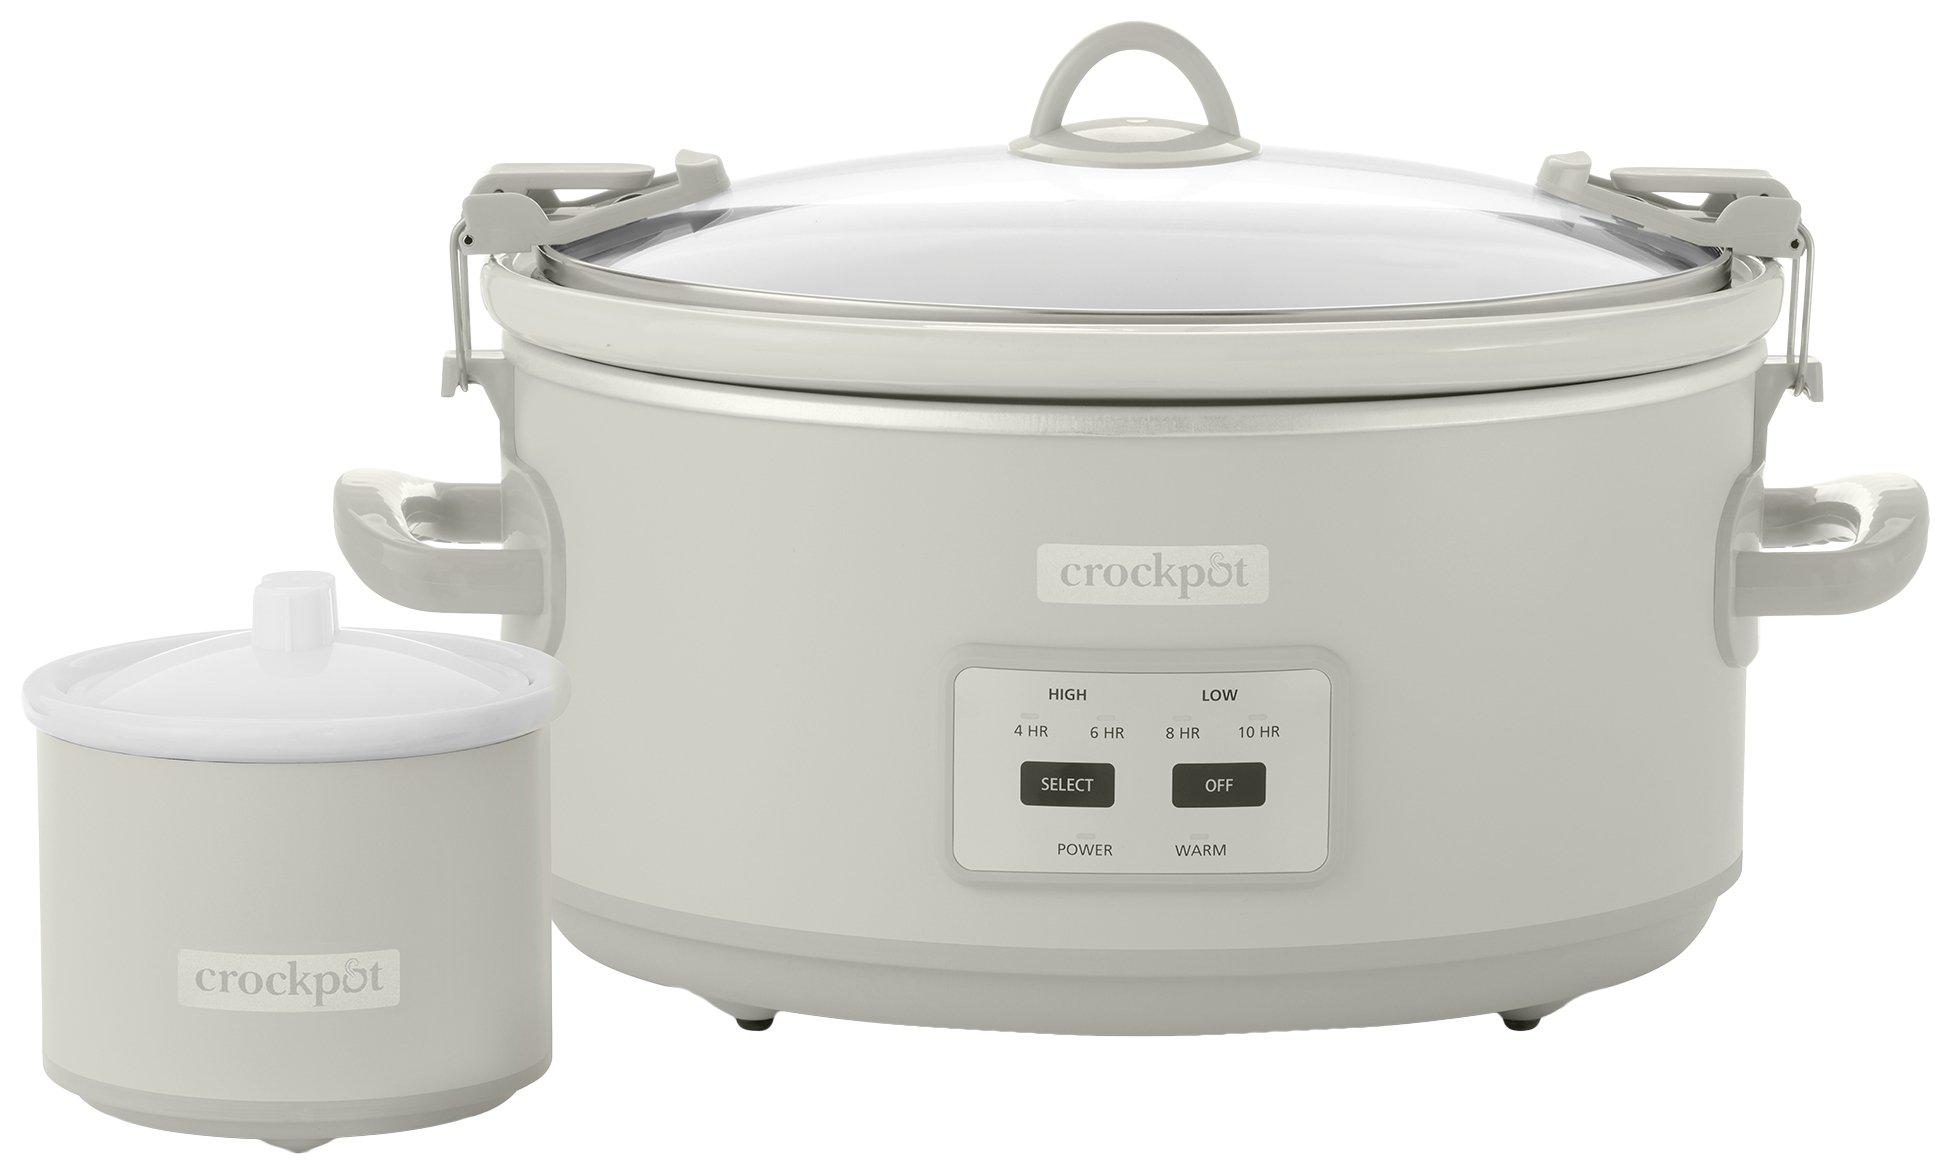 Crockpot 7 Qt Cook and Carry Slow Cooker